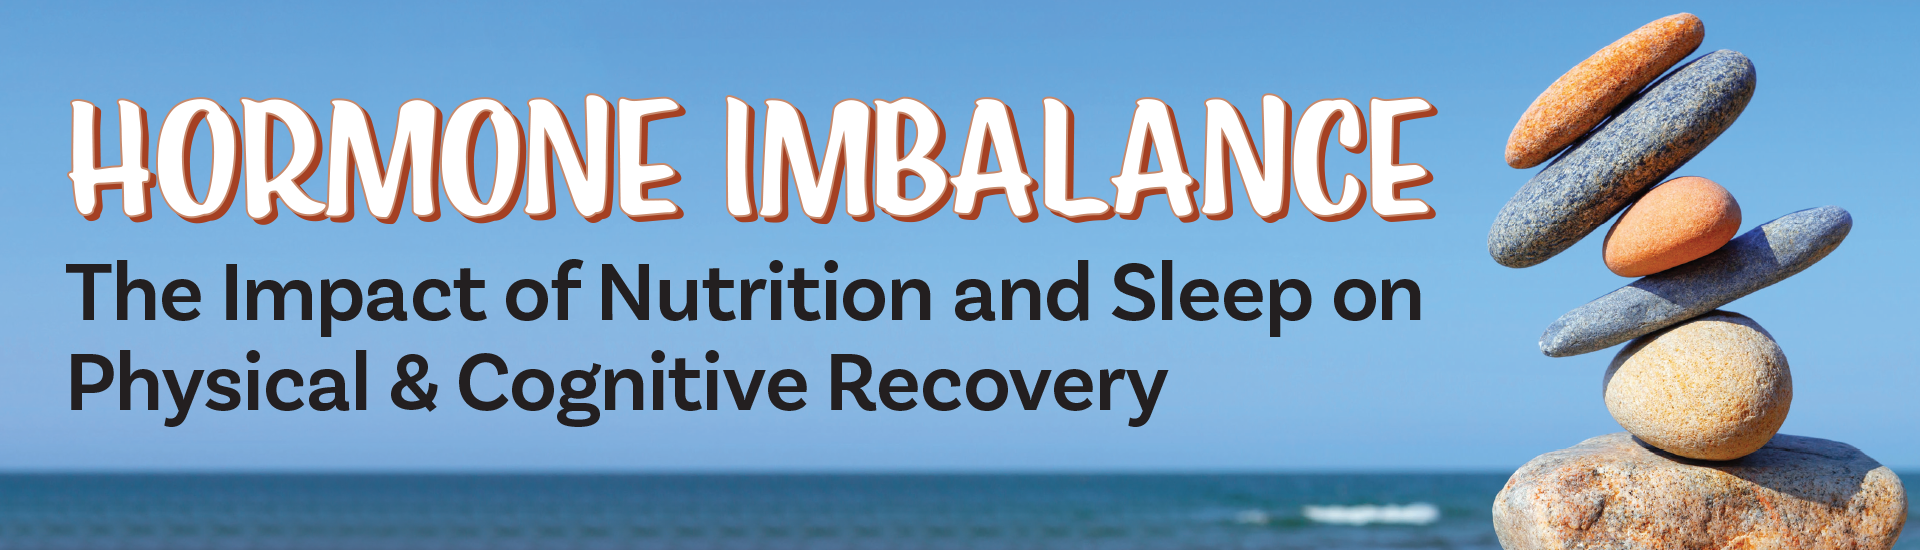 Hormone Imbalance: The Impact of Nutrition and Sleep on Physical & Cognitive Recovery